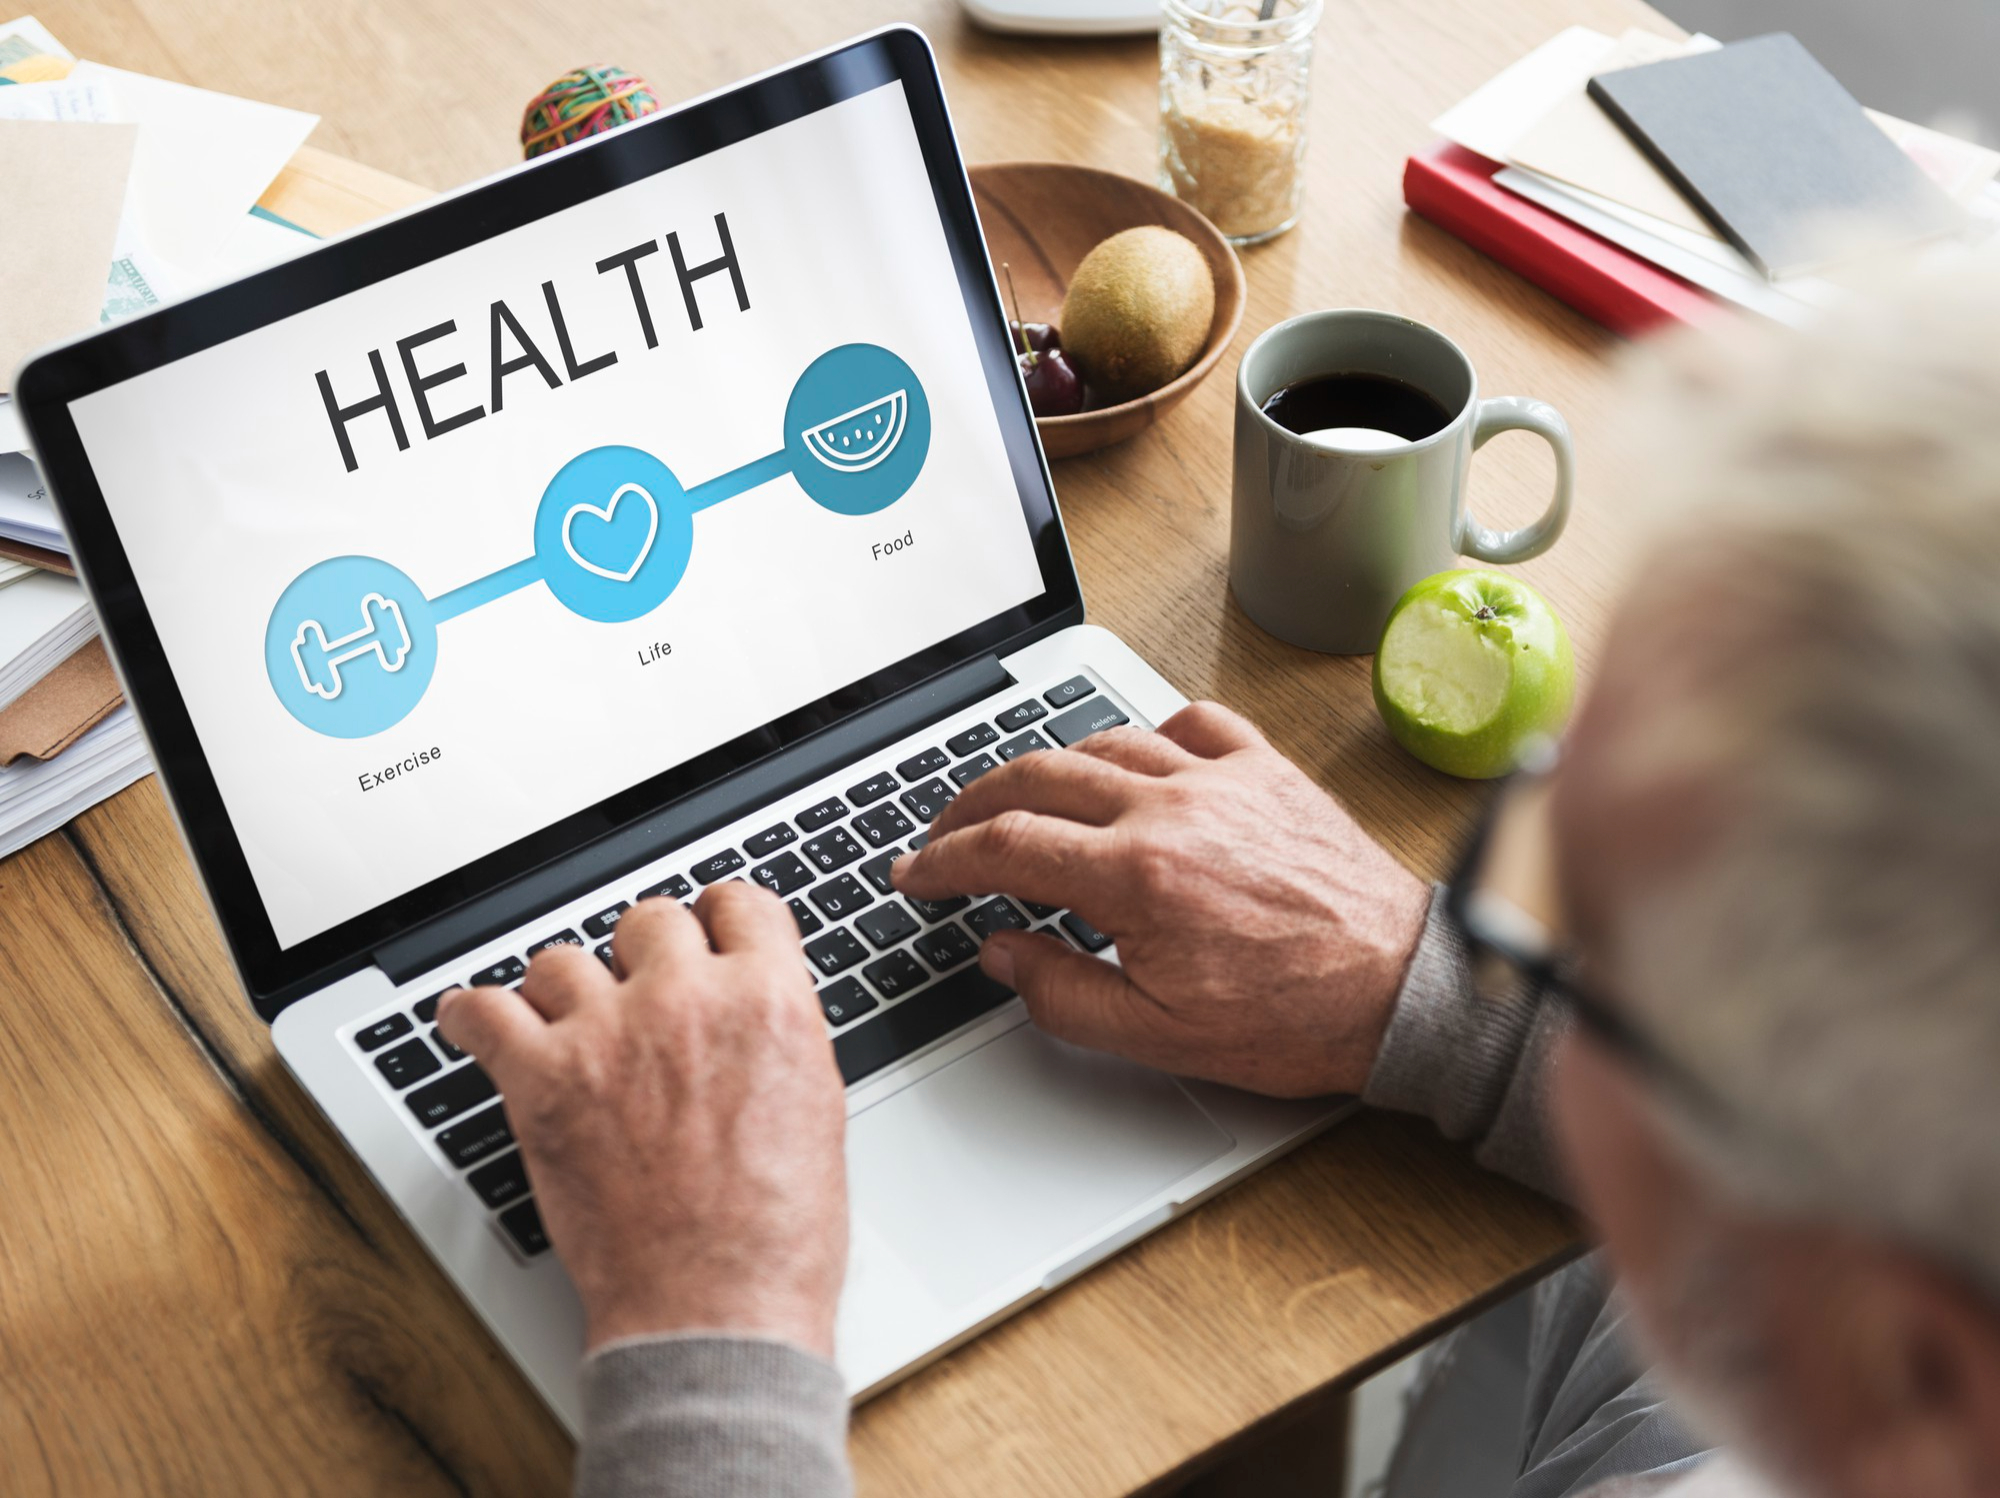 health-information-on-the-net-bane-or-boon-